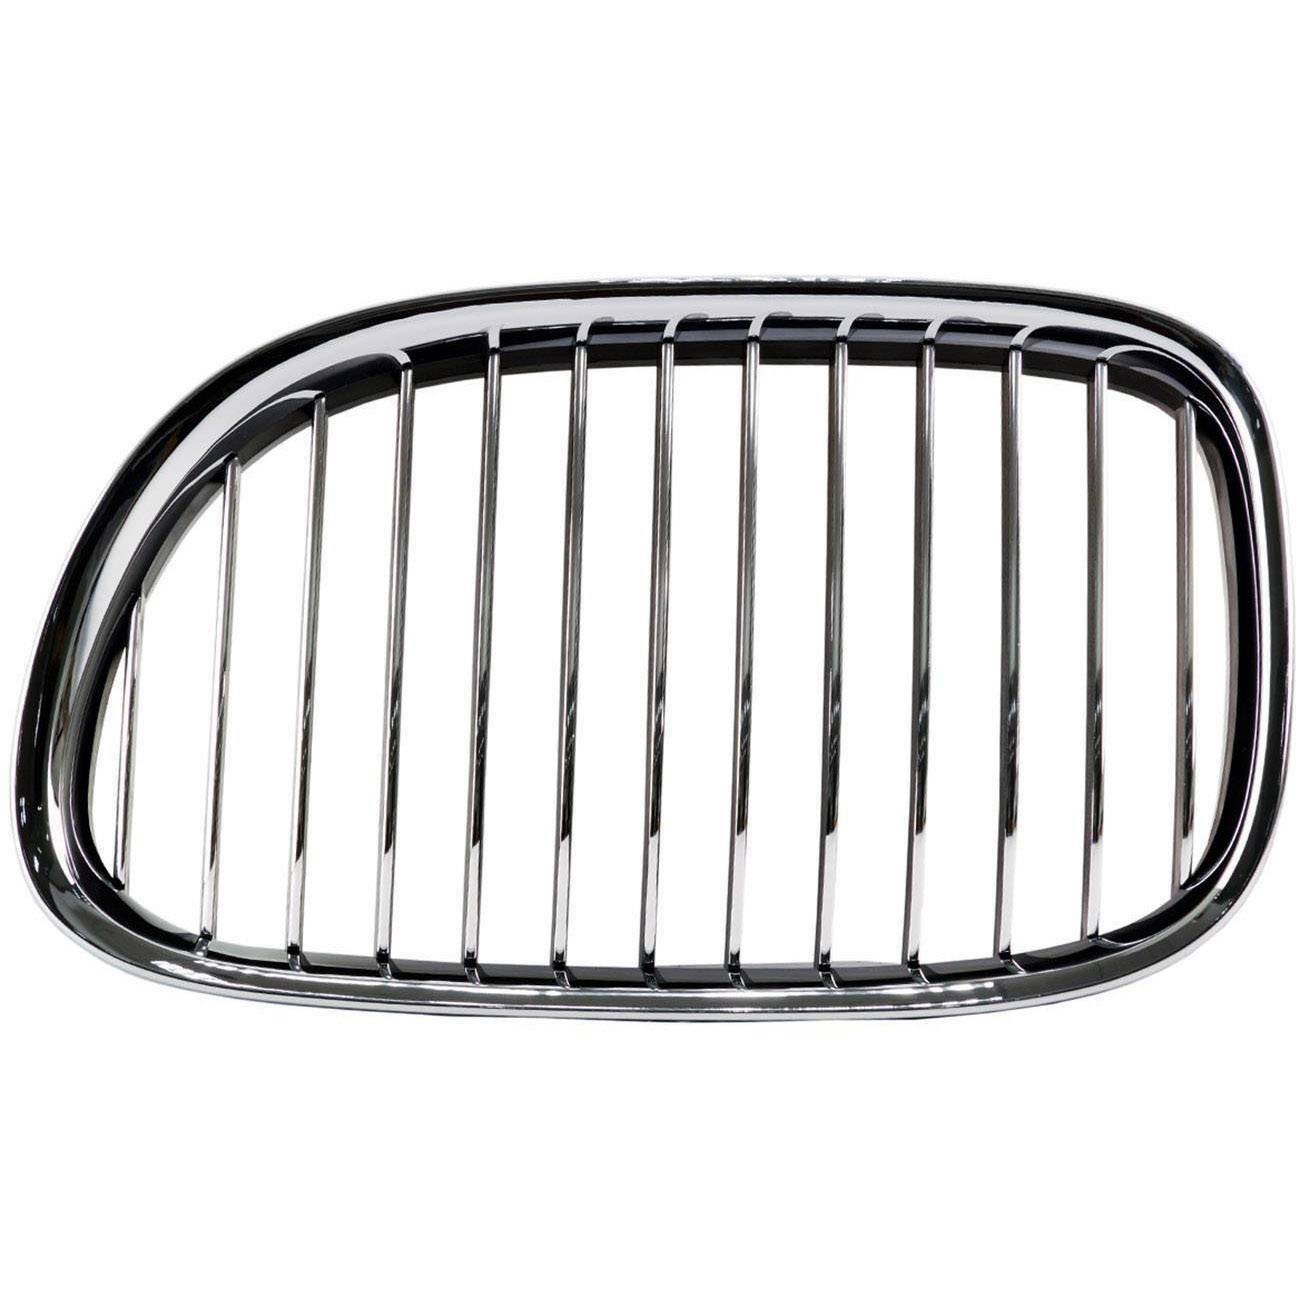 Front Left Grille for 08-15 BMW 7 Series F01 F02 F04 Hybrid 51117184151 German Made